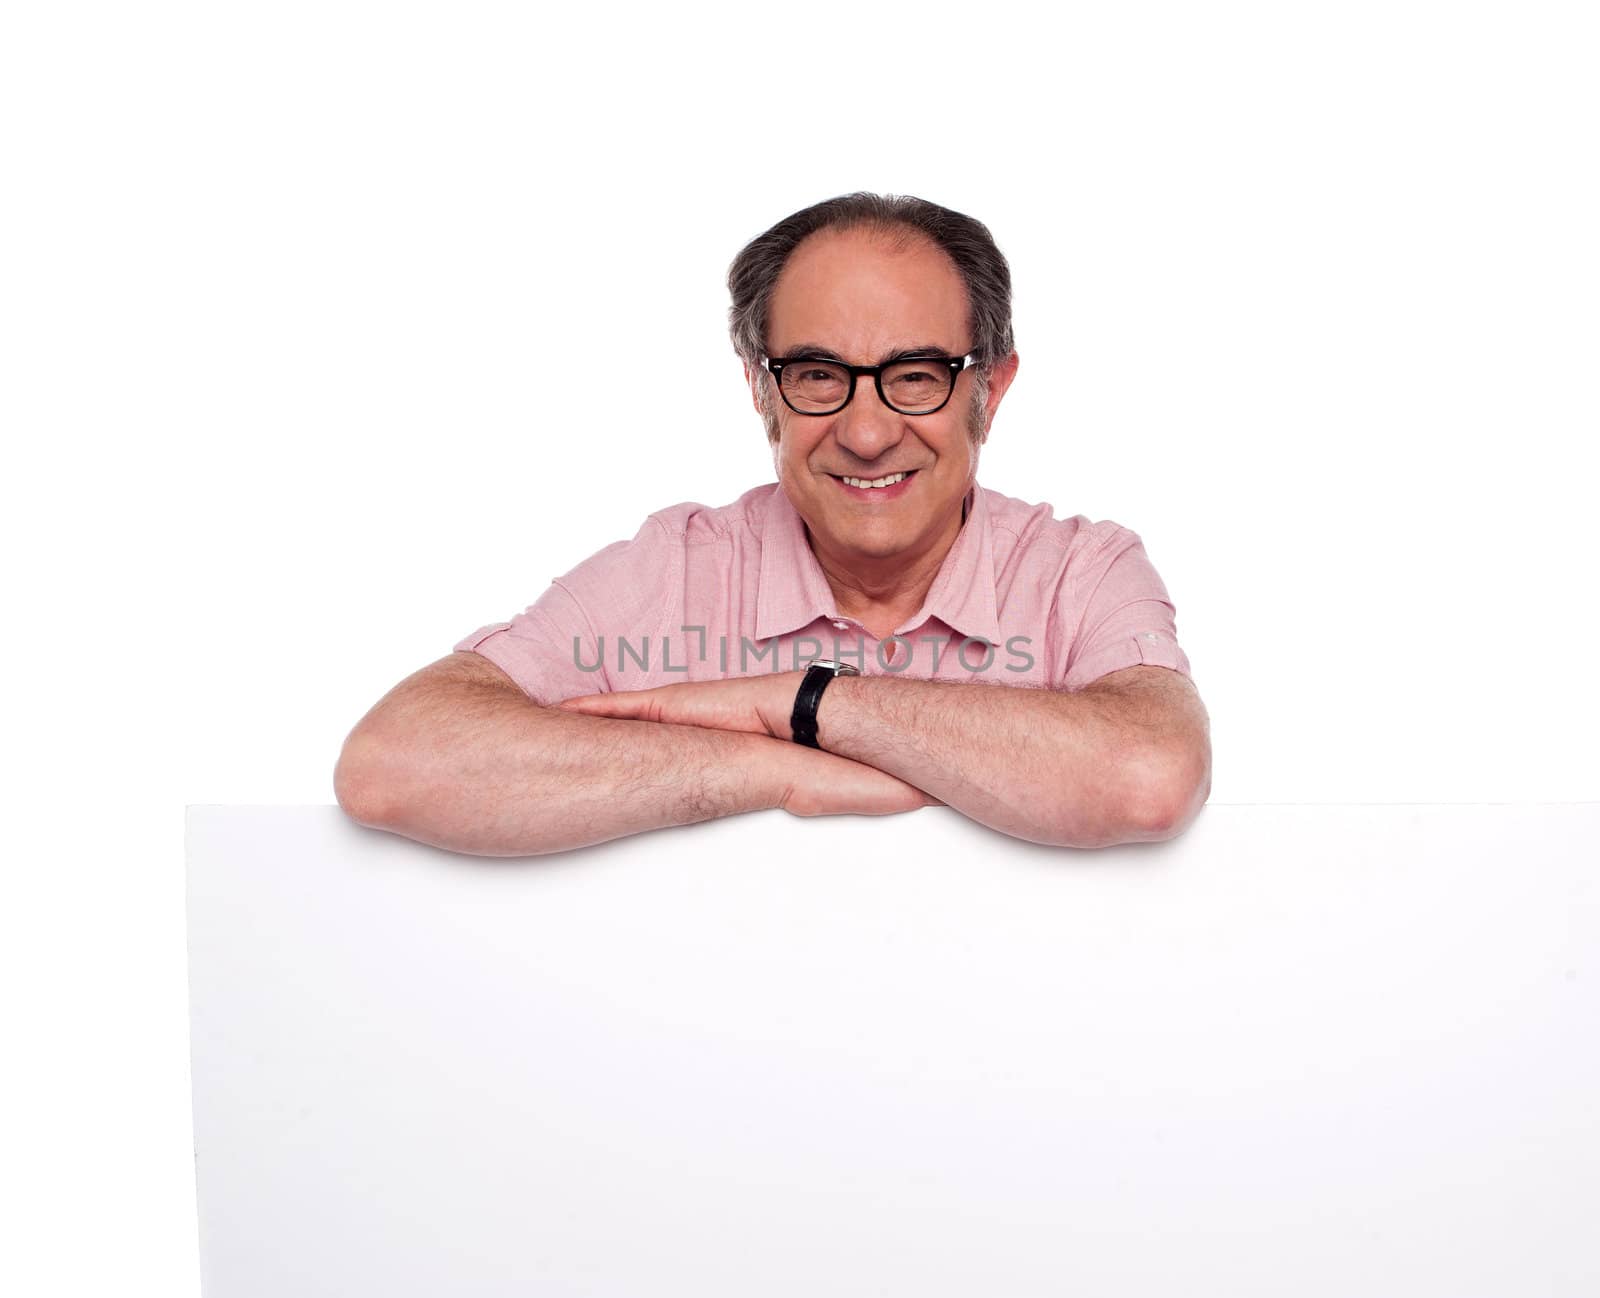 Matured man standing behind blank placard. Isolated over white background